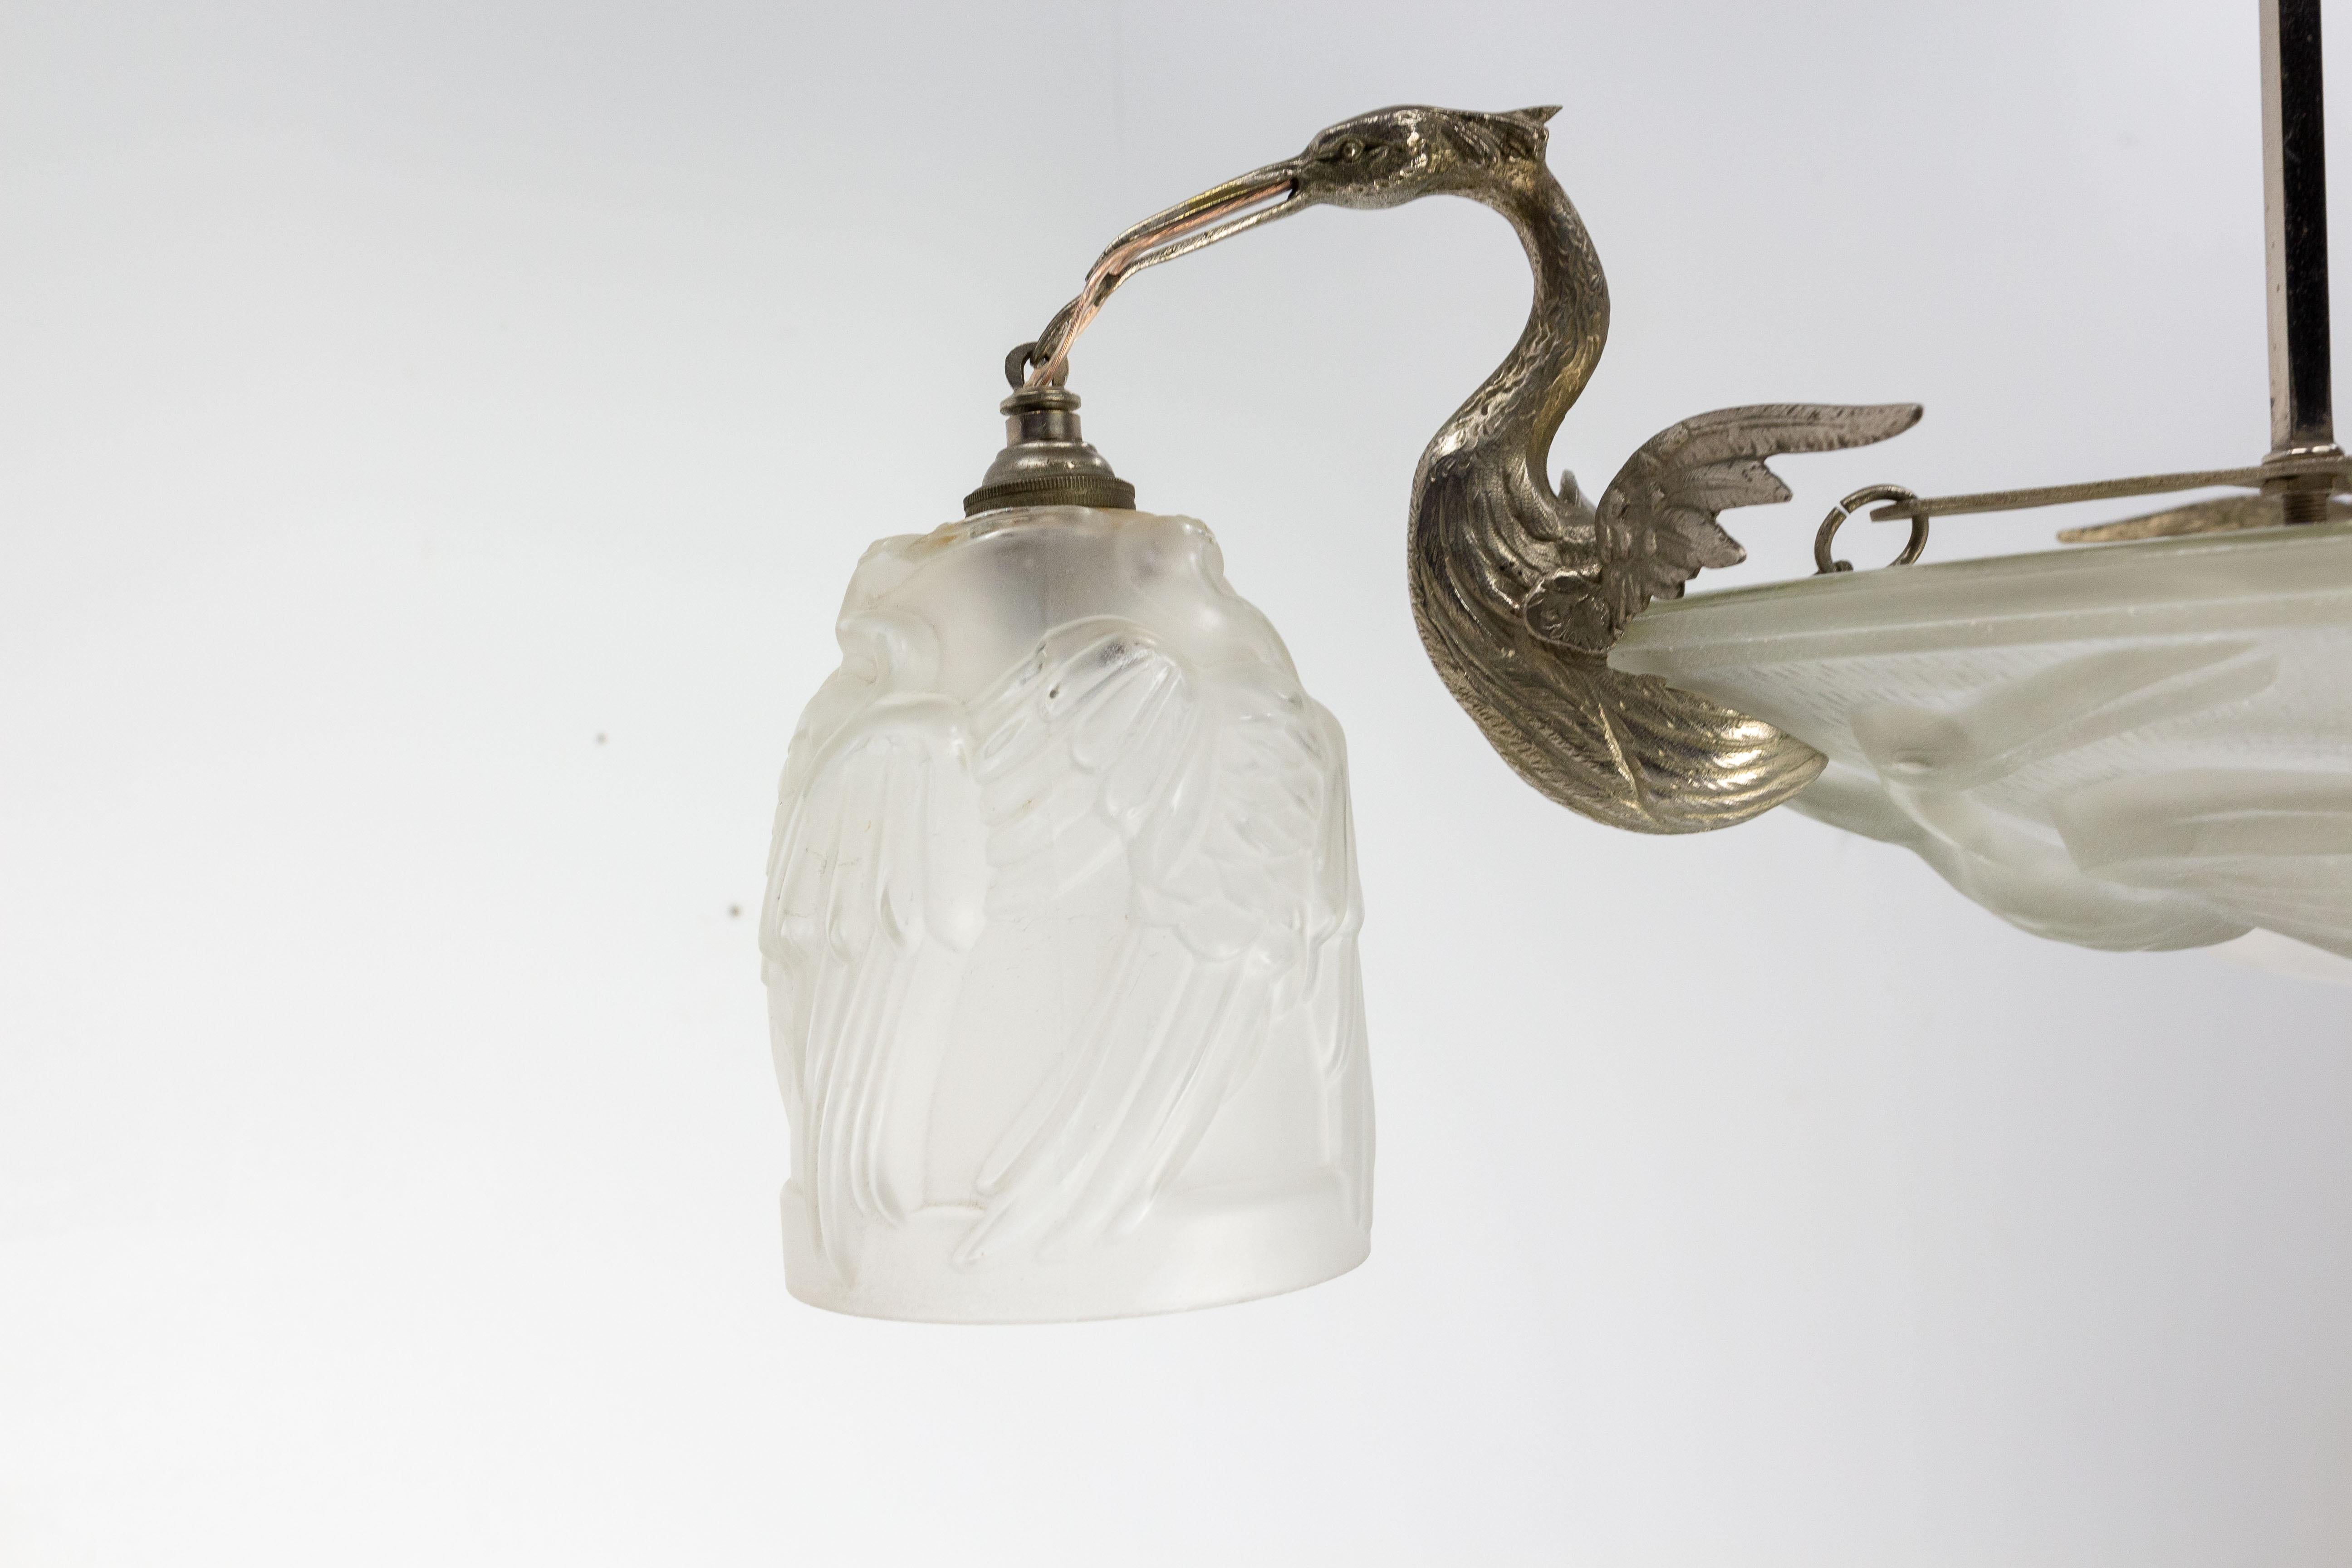 French Art Deco Chandelier Glass & Chrome with Herons Ceiling Pendant, C 1930 For Sale 2